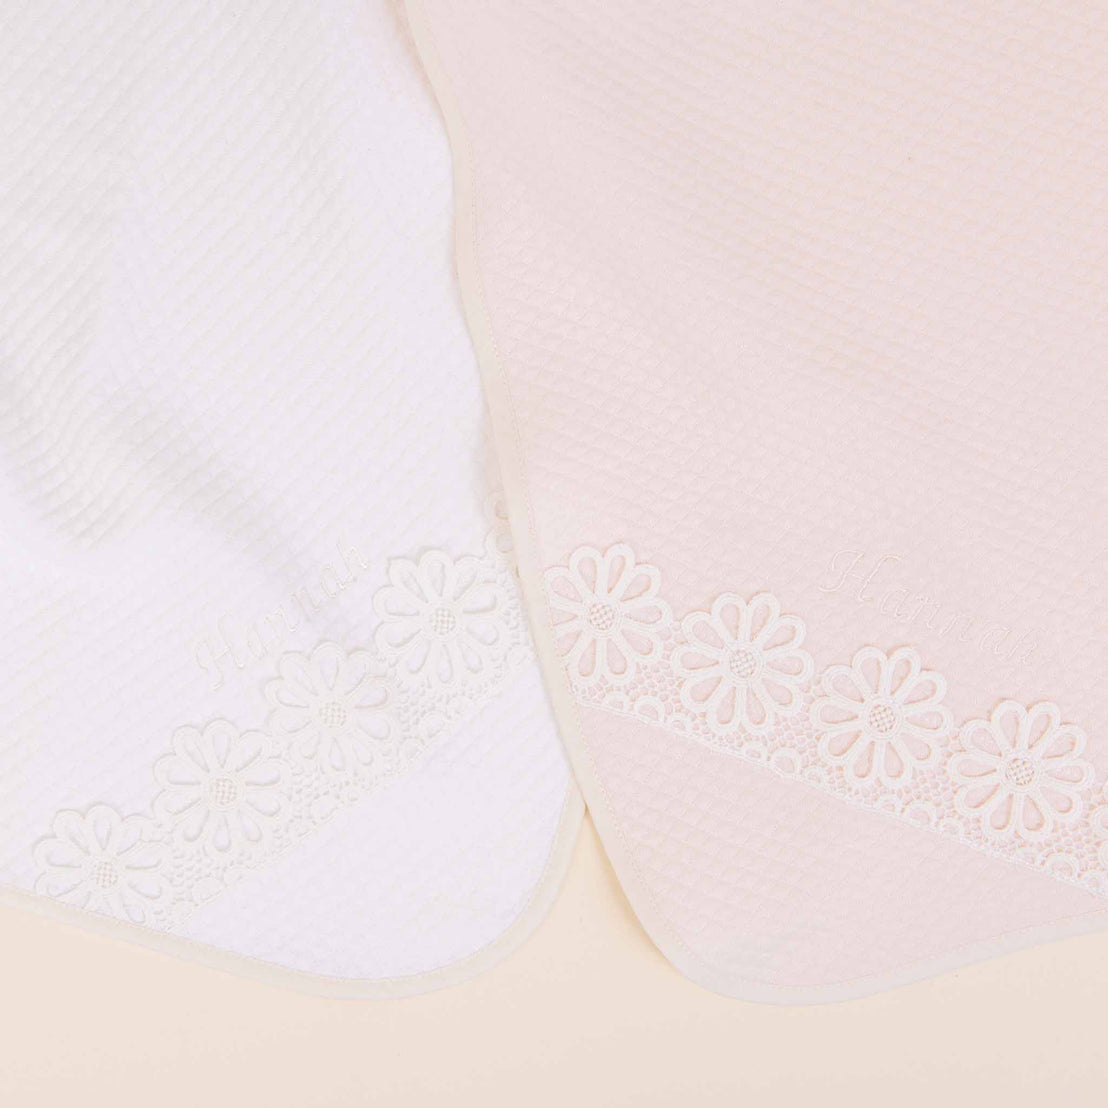 Two Hannah Newborn Gift Sets, one white and one pink, both embellished with floral lace details and part of a vintage baby clothes collection, overlapping slightly against a soft beige background.